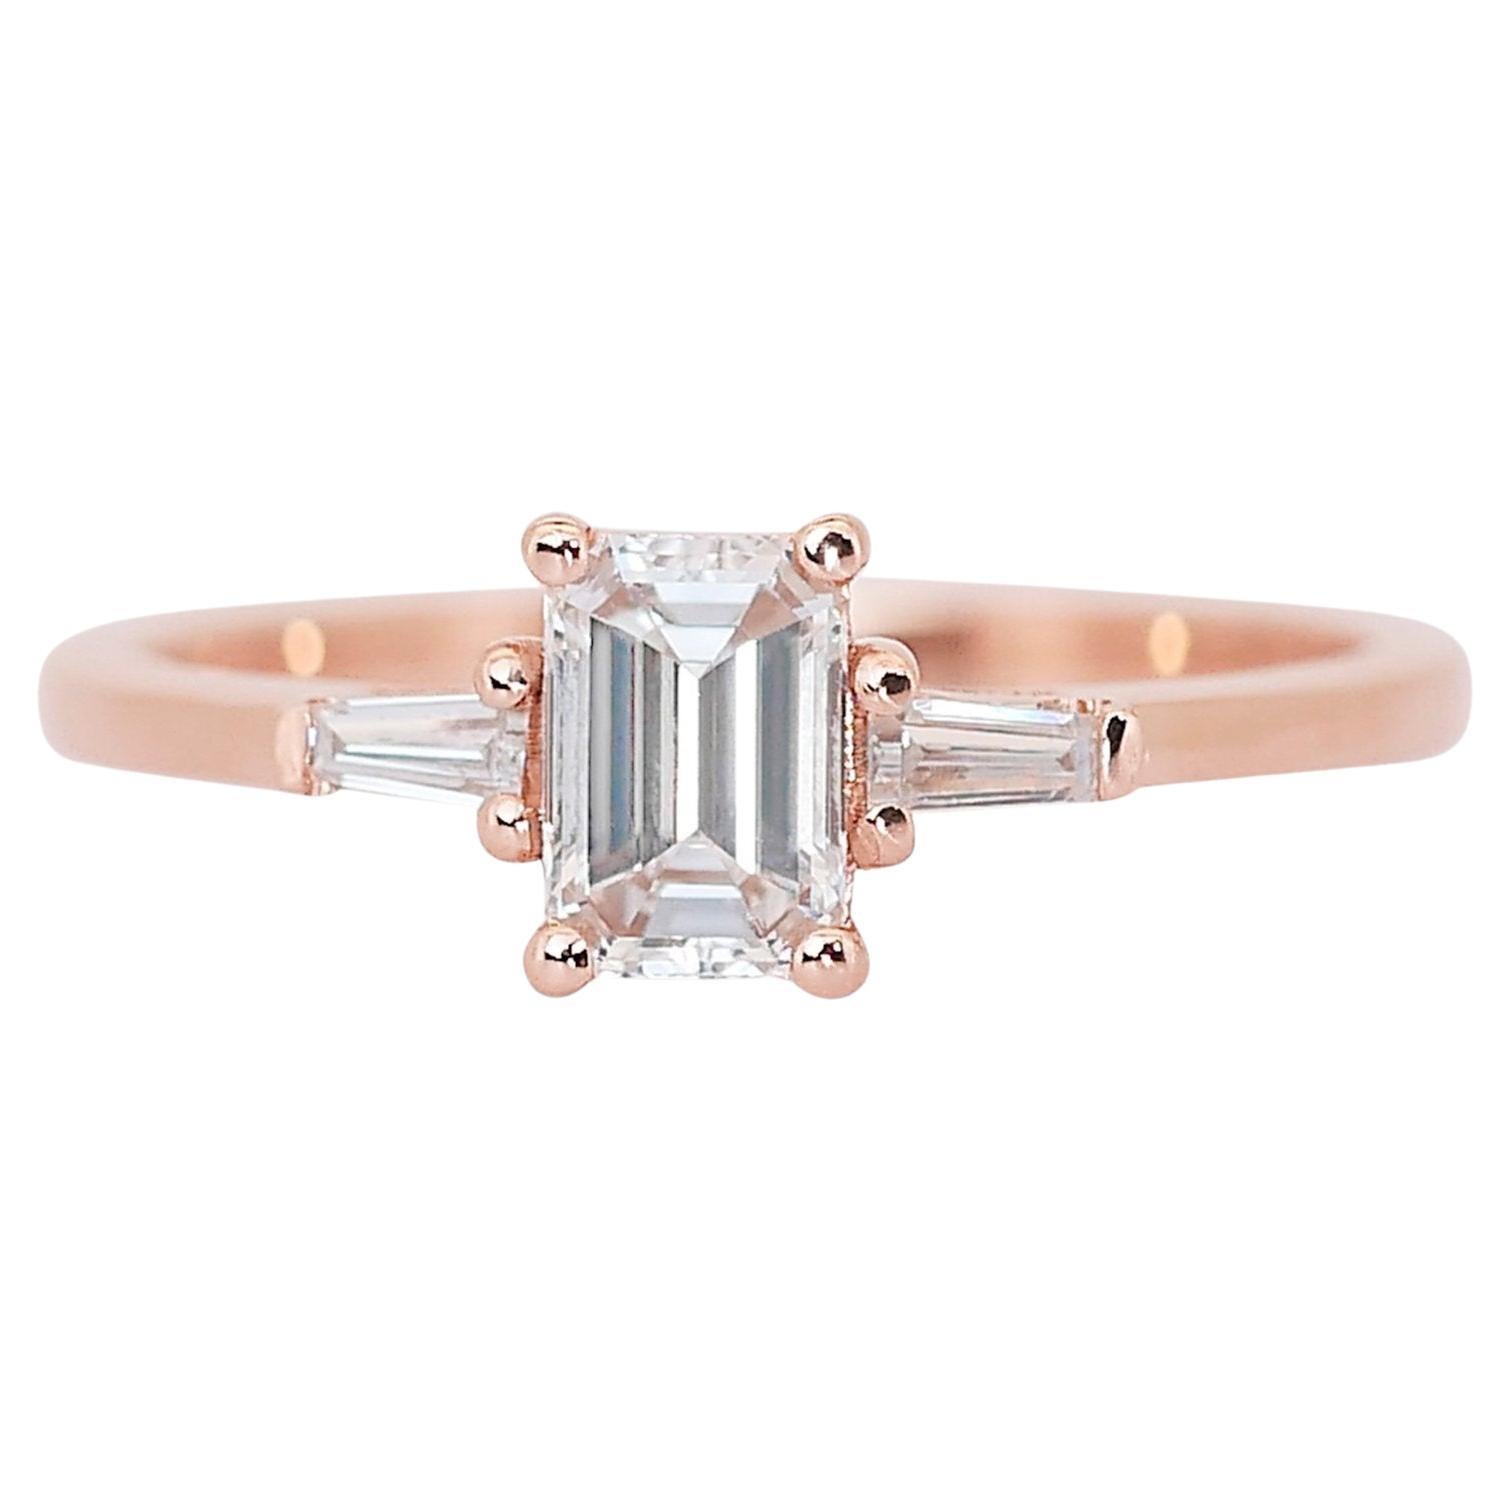 Elegant 0.90ct Emerald-Cut Diamond 3-Stone Ring in 18k Rose Gold - GIA Certified For Sale